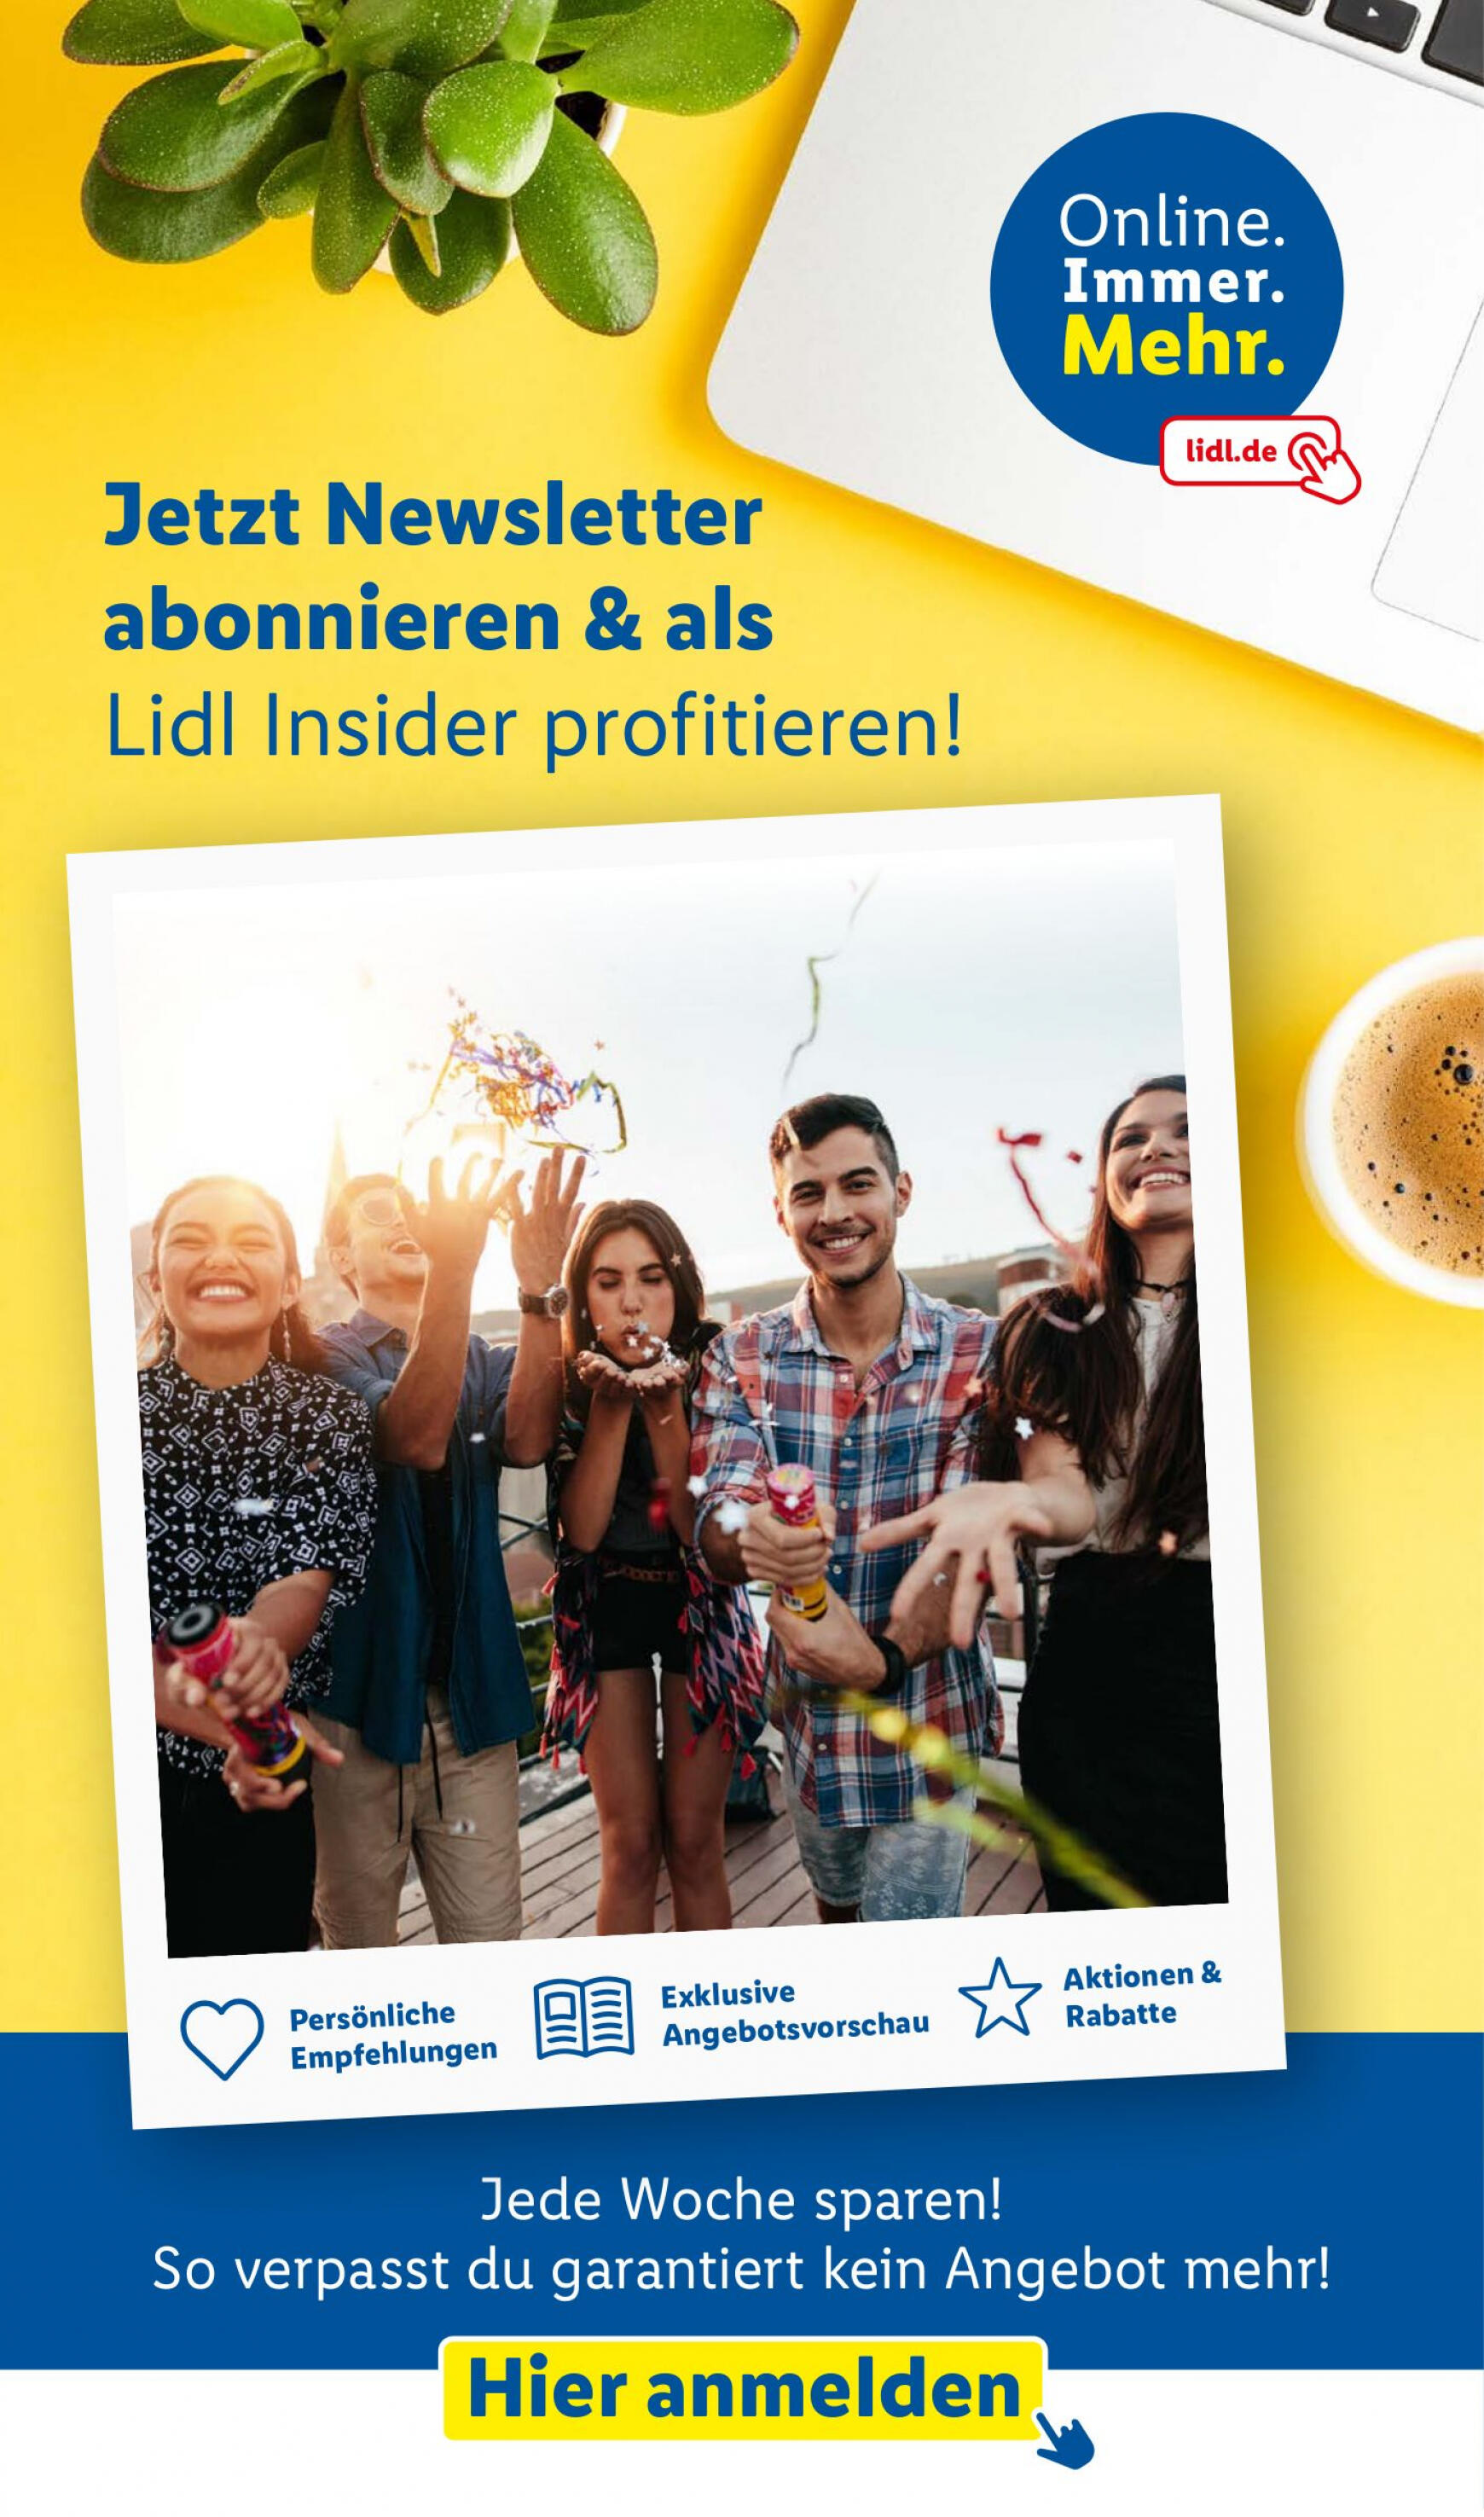 lidl - Flyer Lidl aktuell 06.05. - 11.05. - page: 57